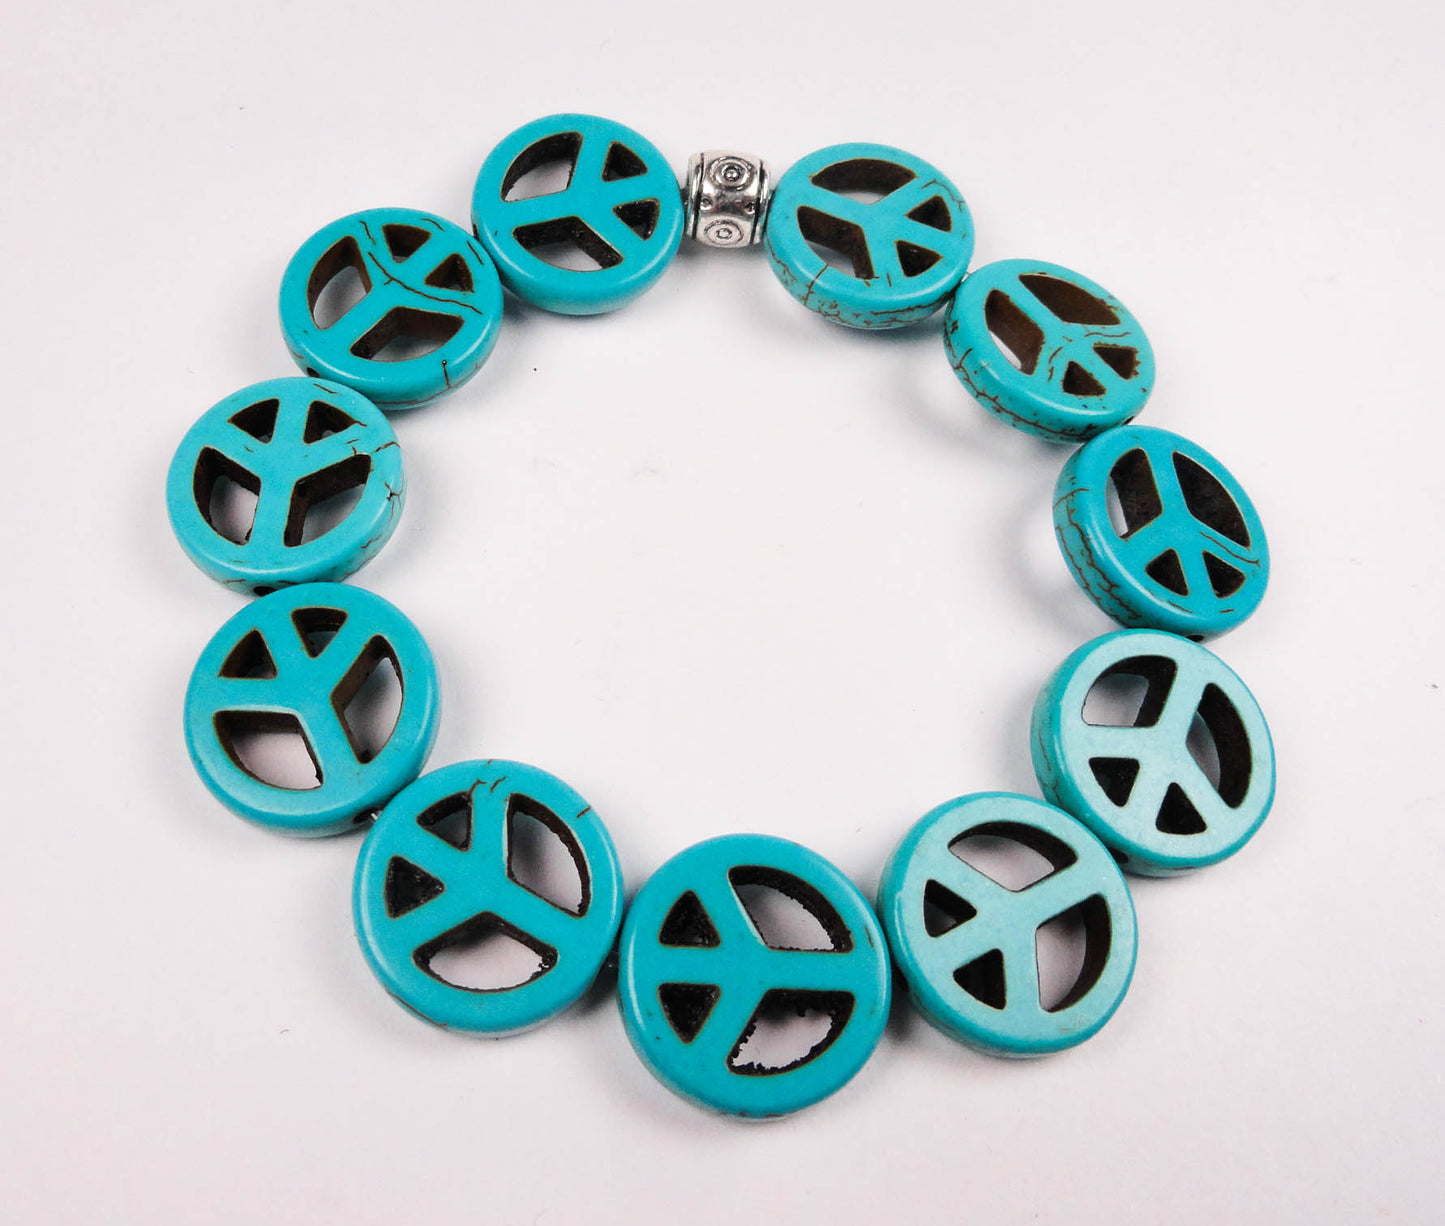 Vintage Peace Sign - Turquoise Stone - Low Tide Island Designs